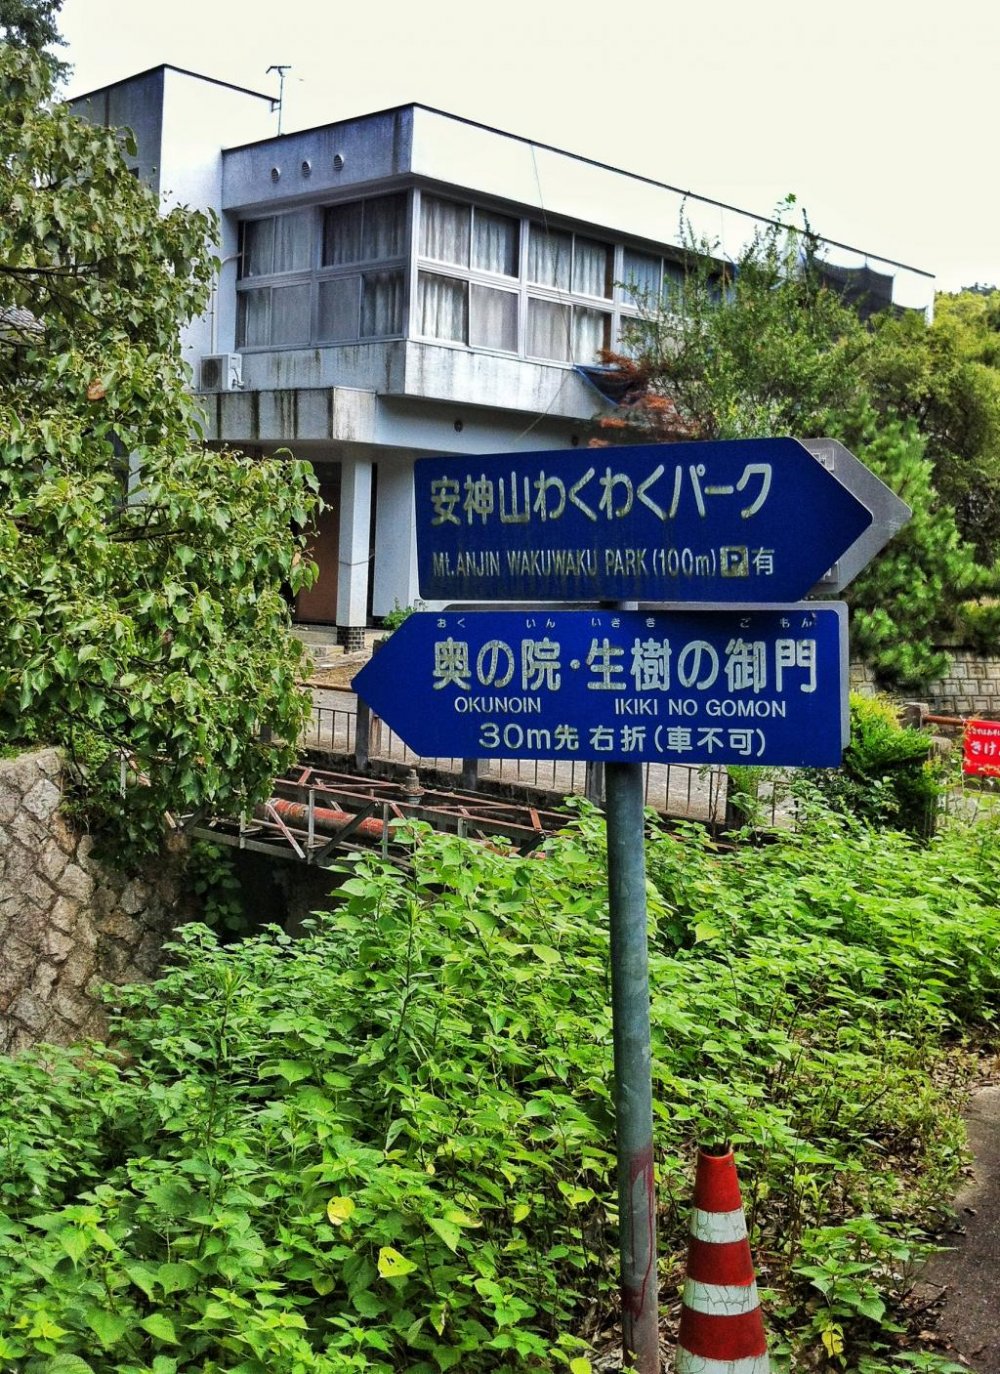 Oku-no-In is very well signposted. There's no mistaking the route